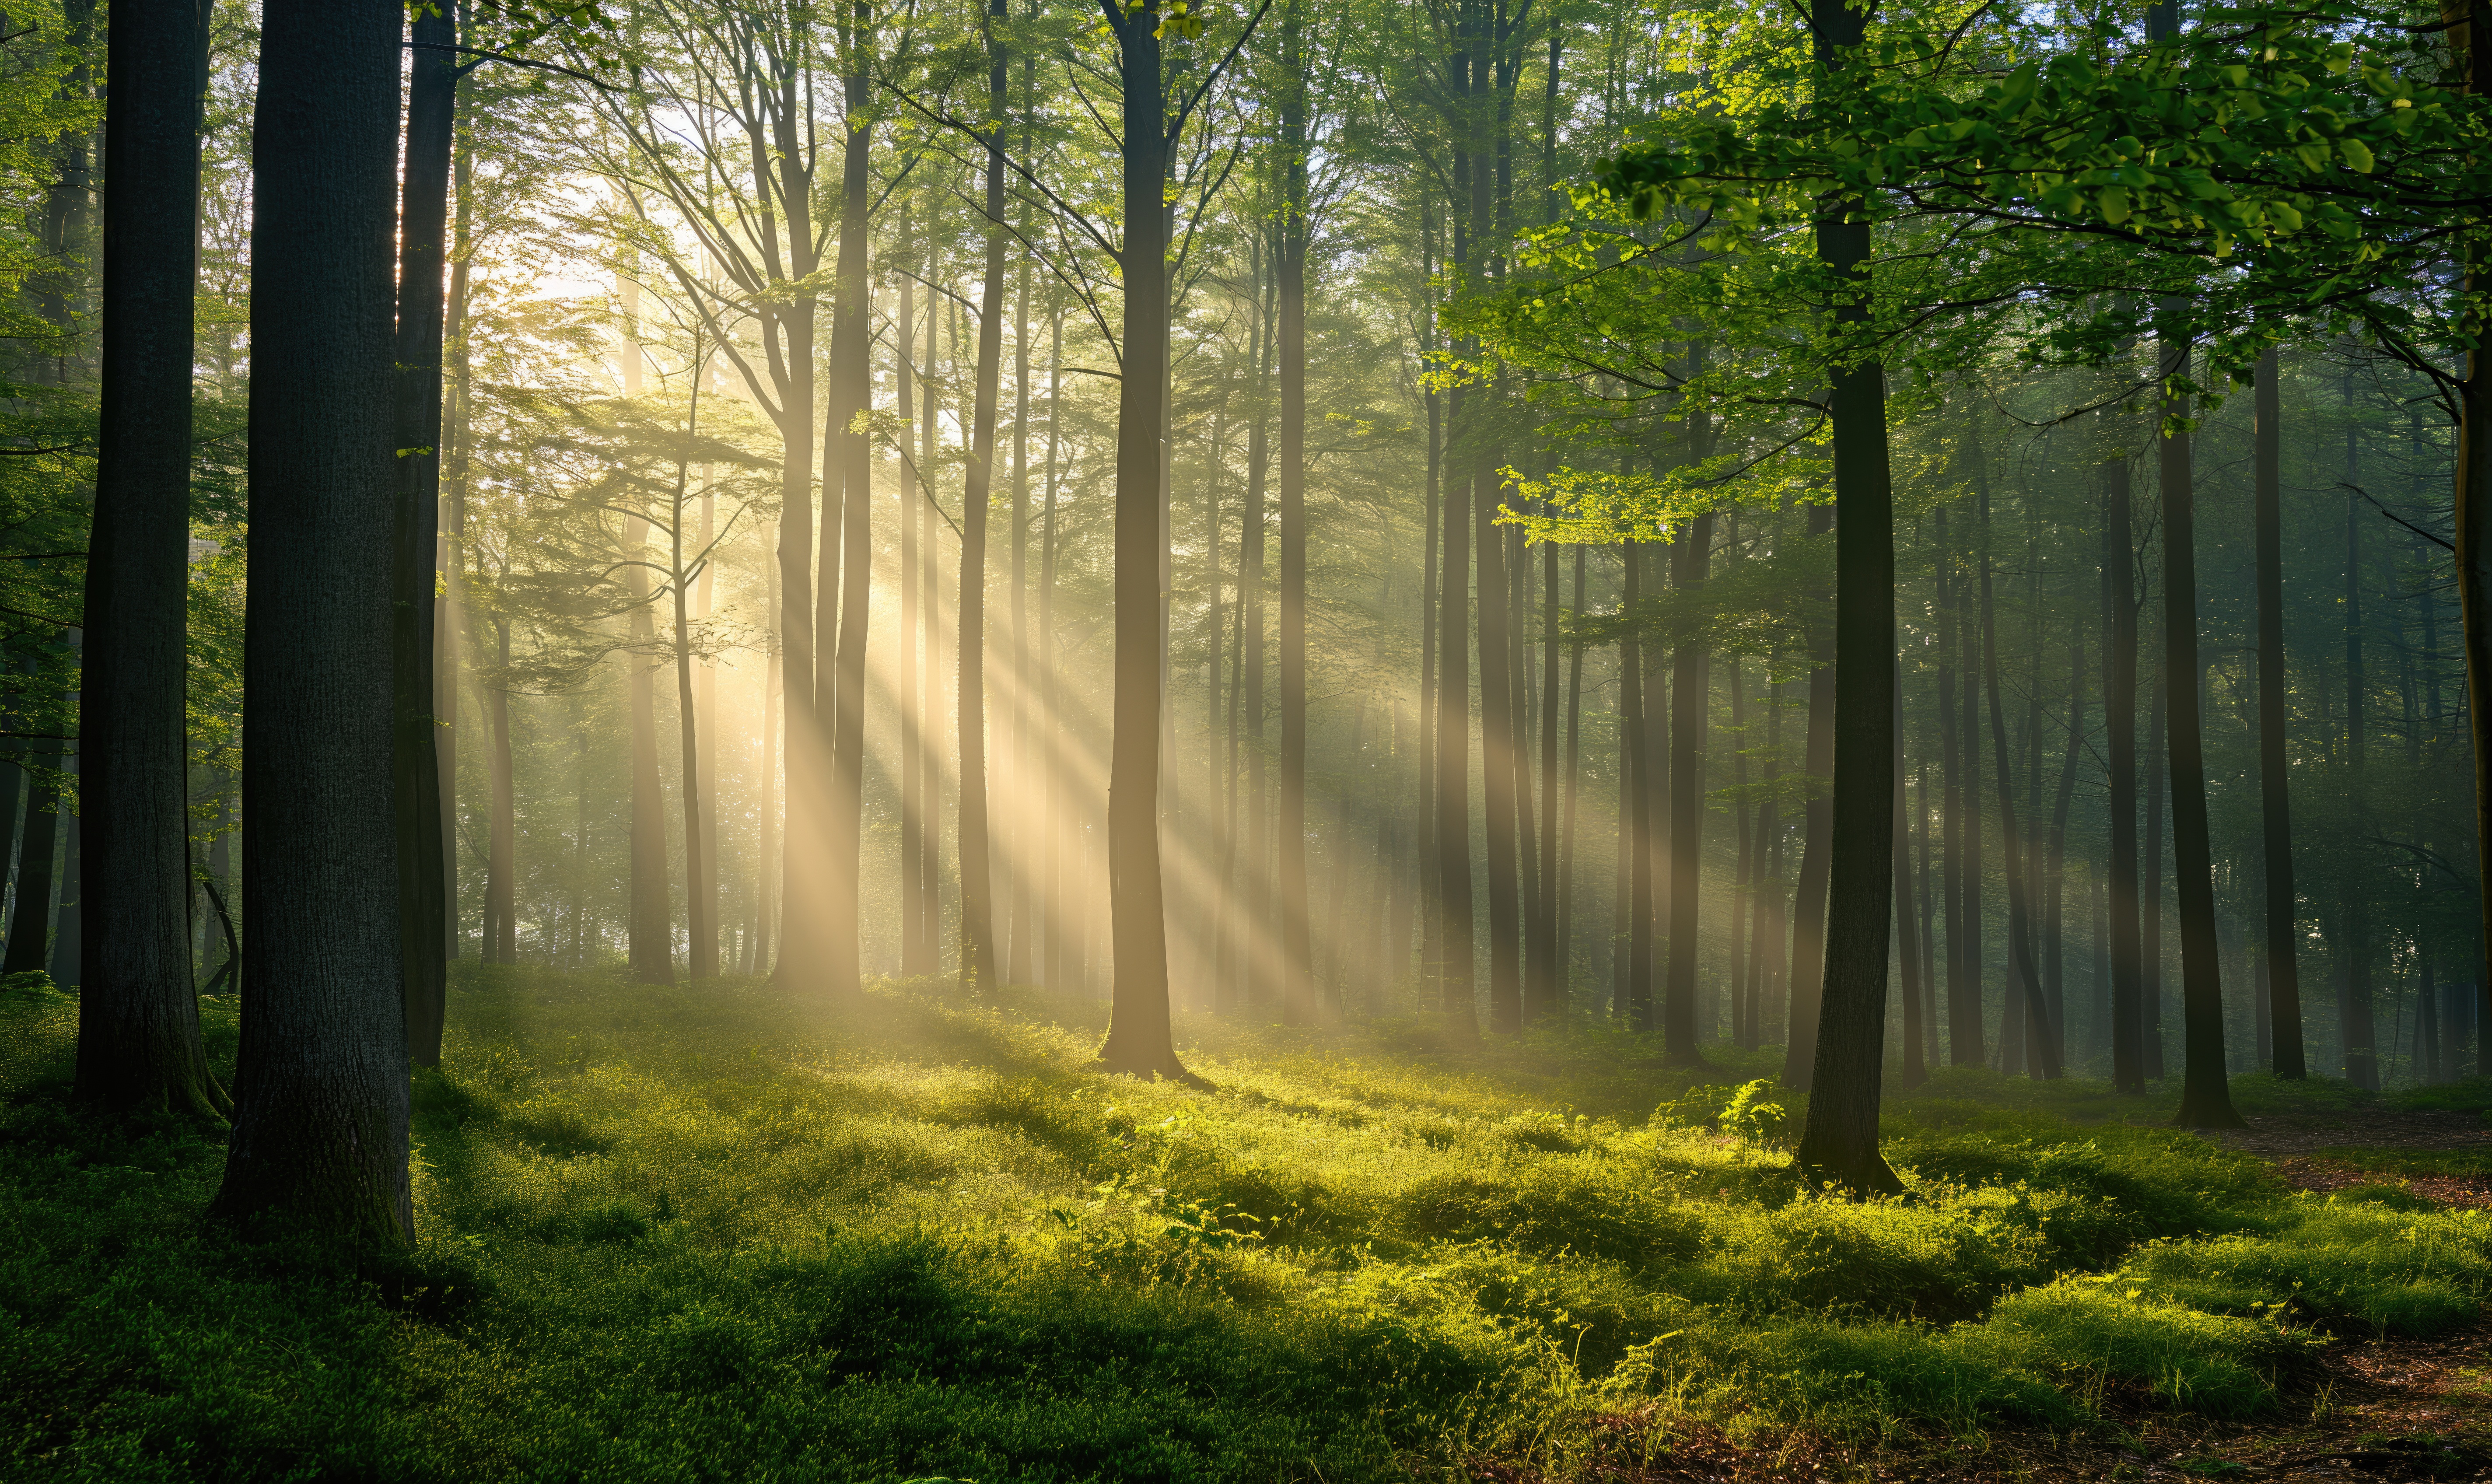 Sun rays filtering through forest branches. The perfect setting for forest bathing, a great idea on the Spring bucket list for introverts.